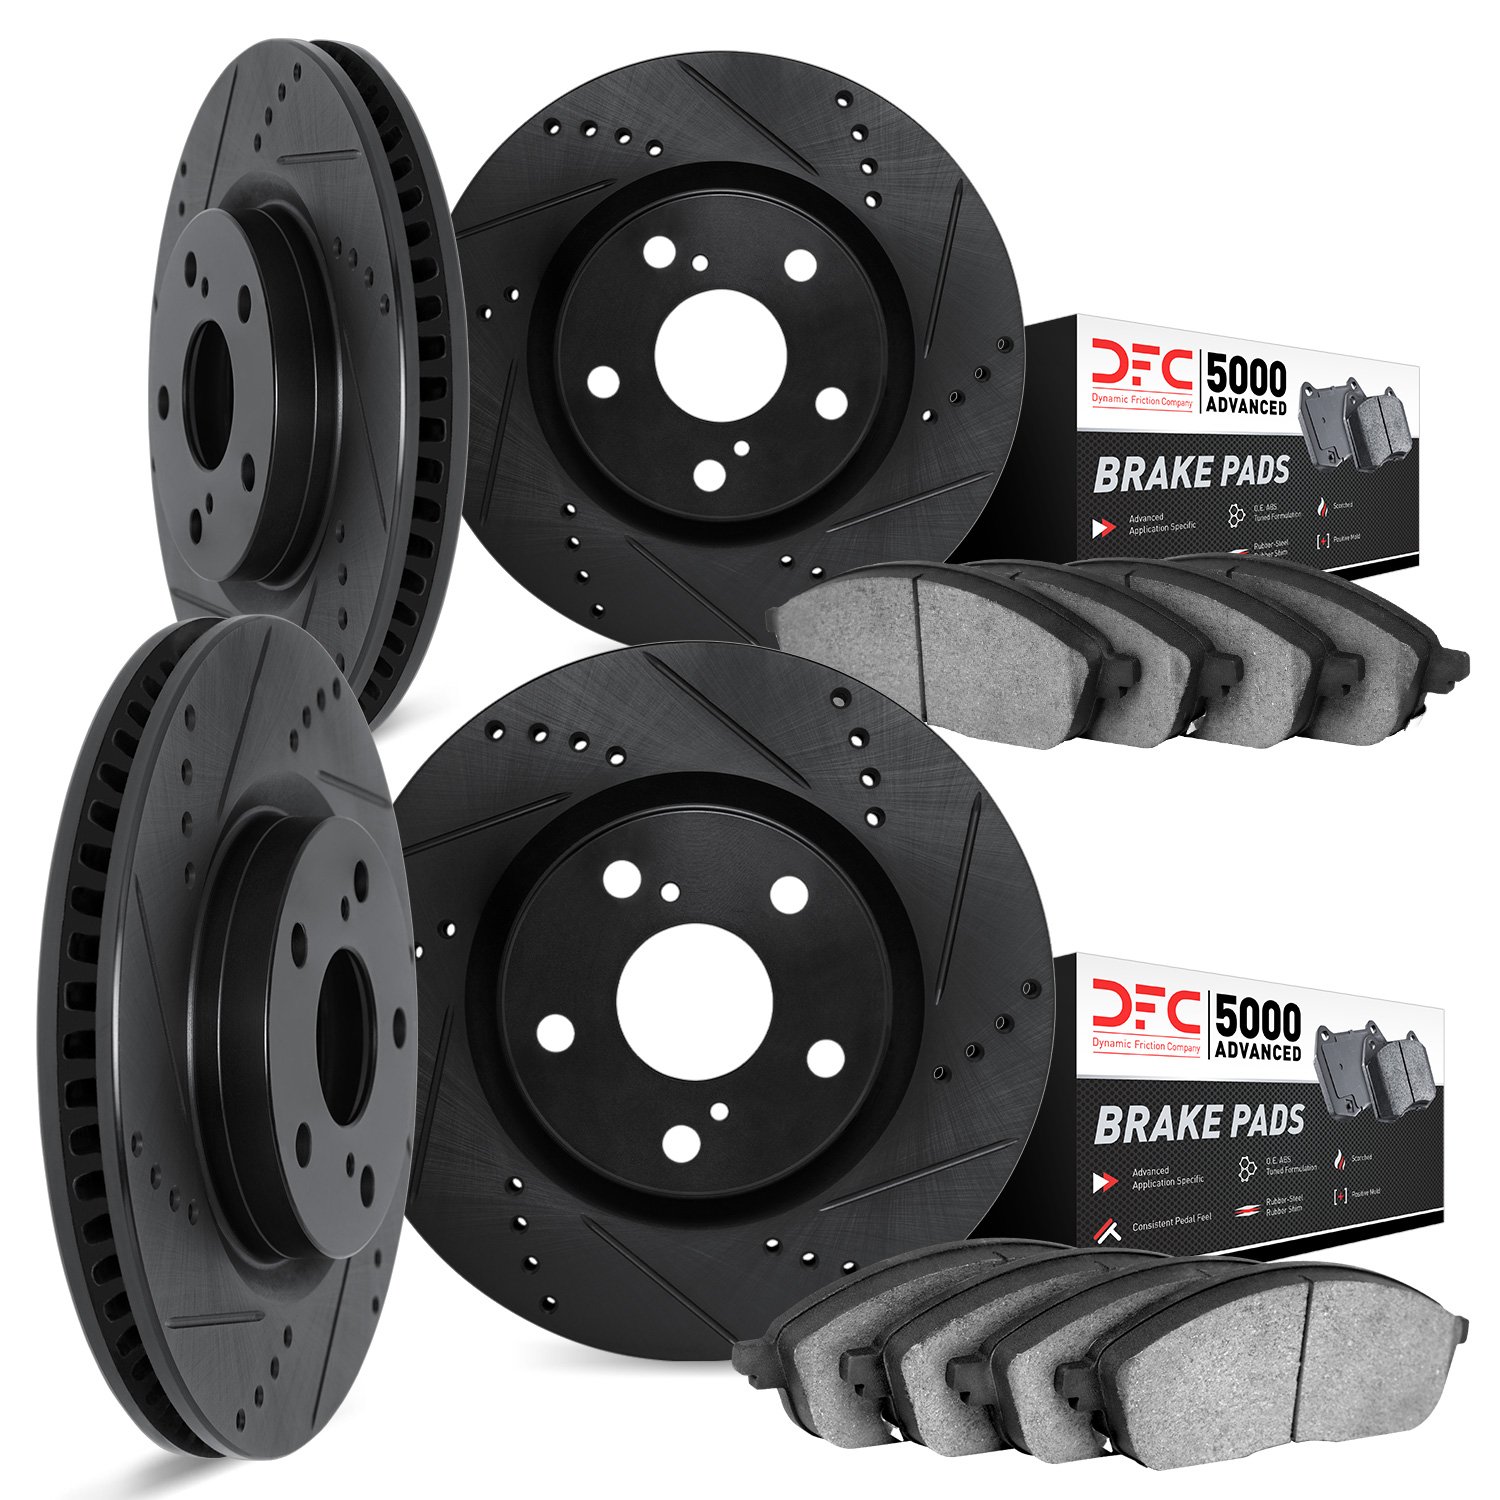 8504-74081 Drilled/Slotted Brake Rotors w/5000 Advanced Brake Pads Kit [Black], 2006-2010 Audi/Volkswagen, Position: Front and R